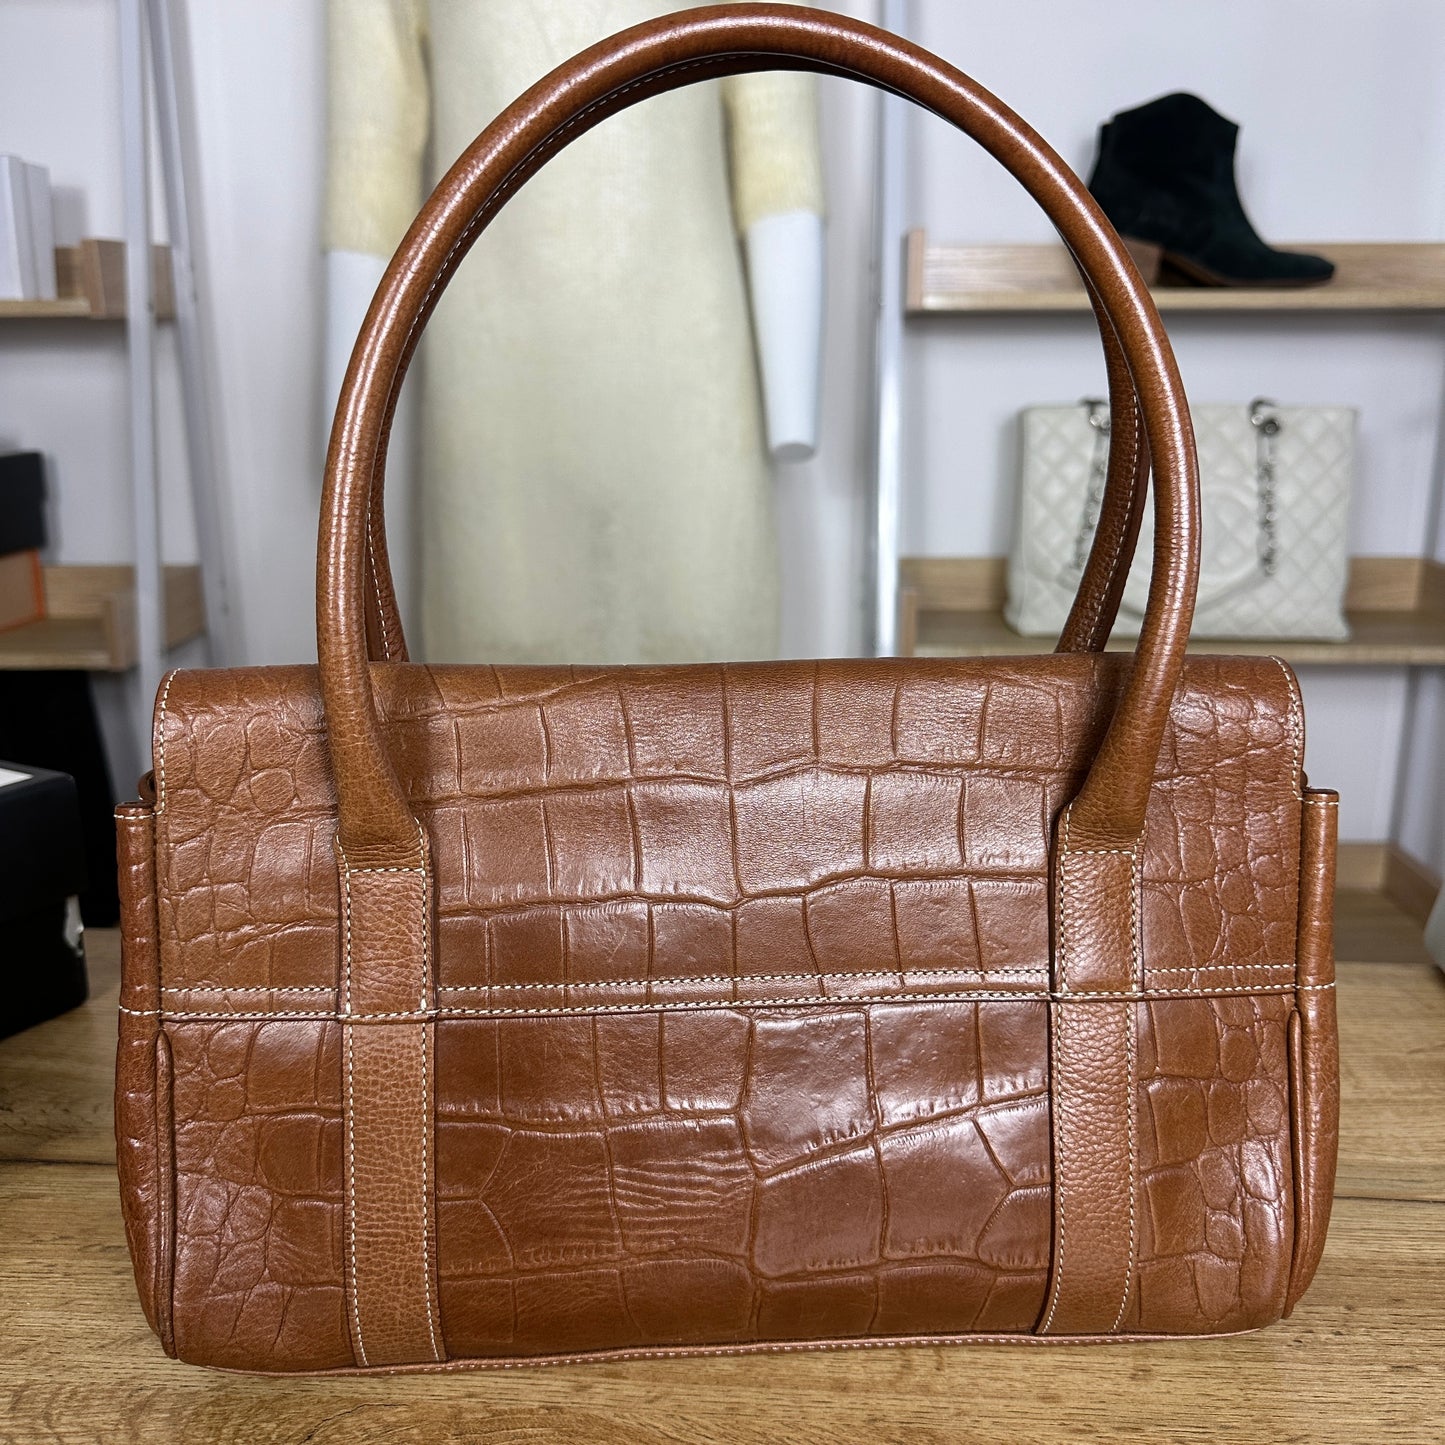 Mulberry Bayswater Brown Croc